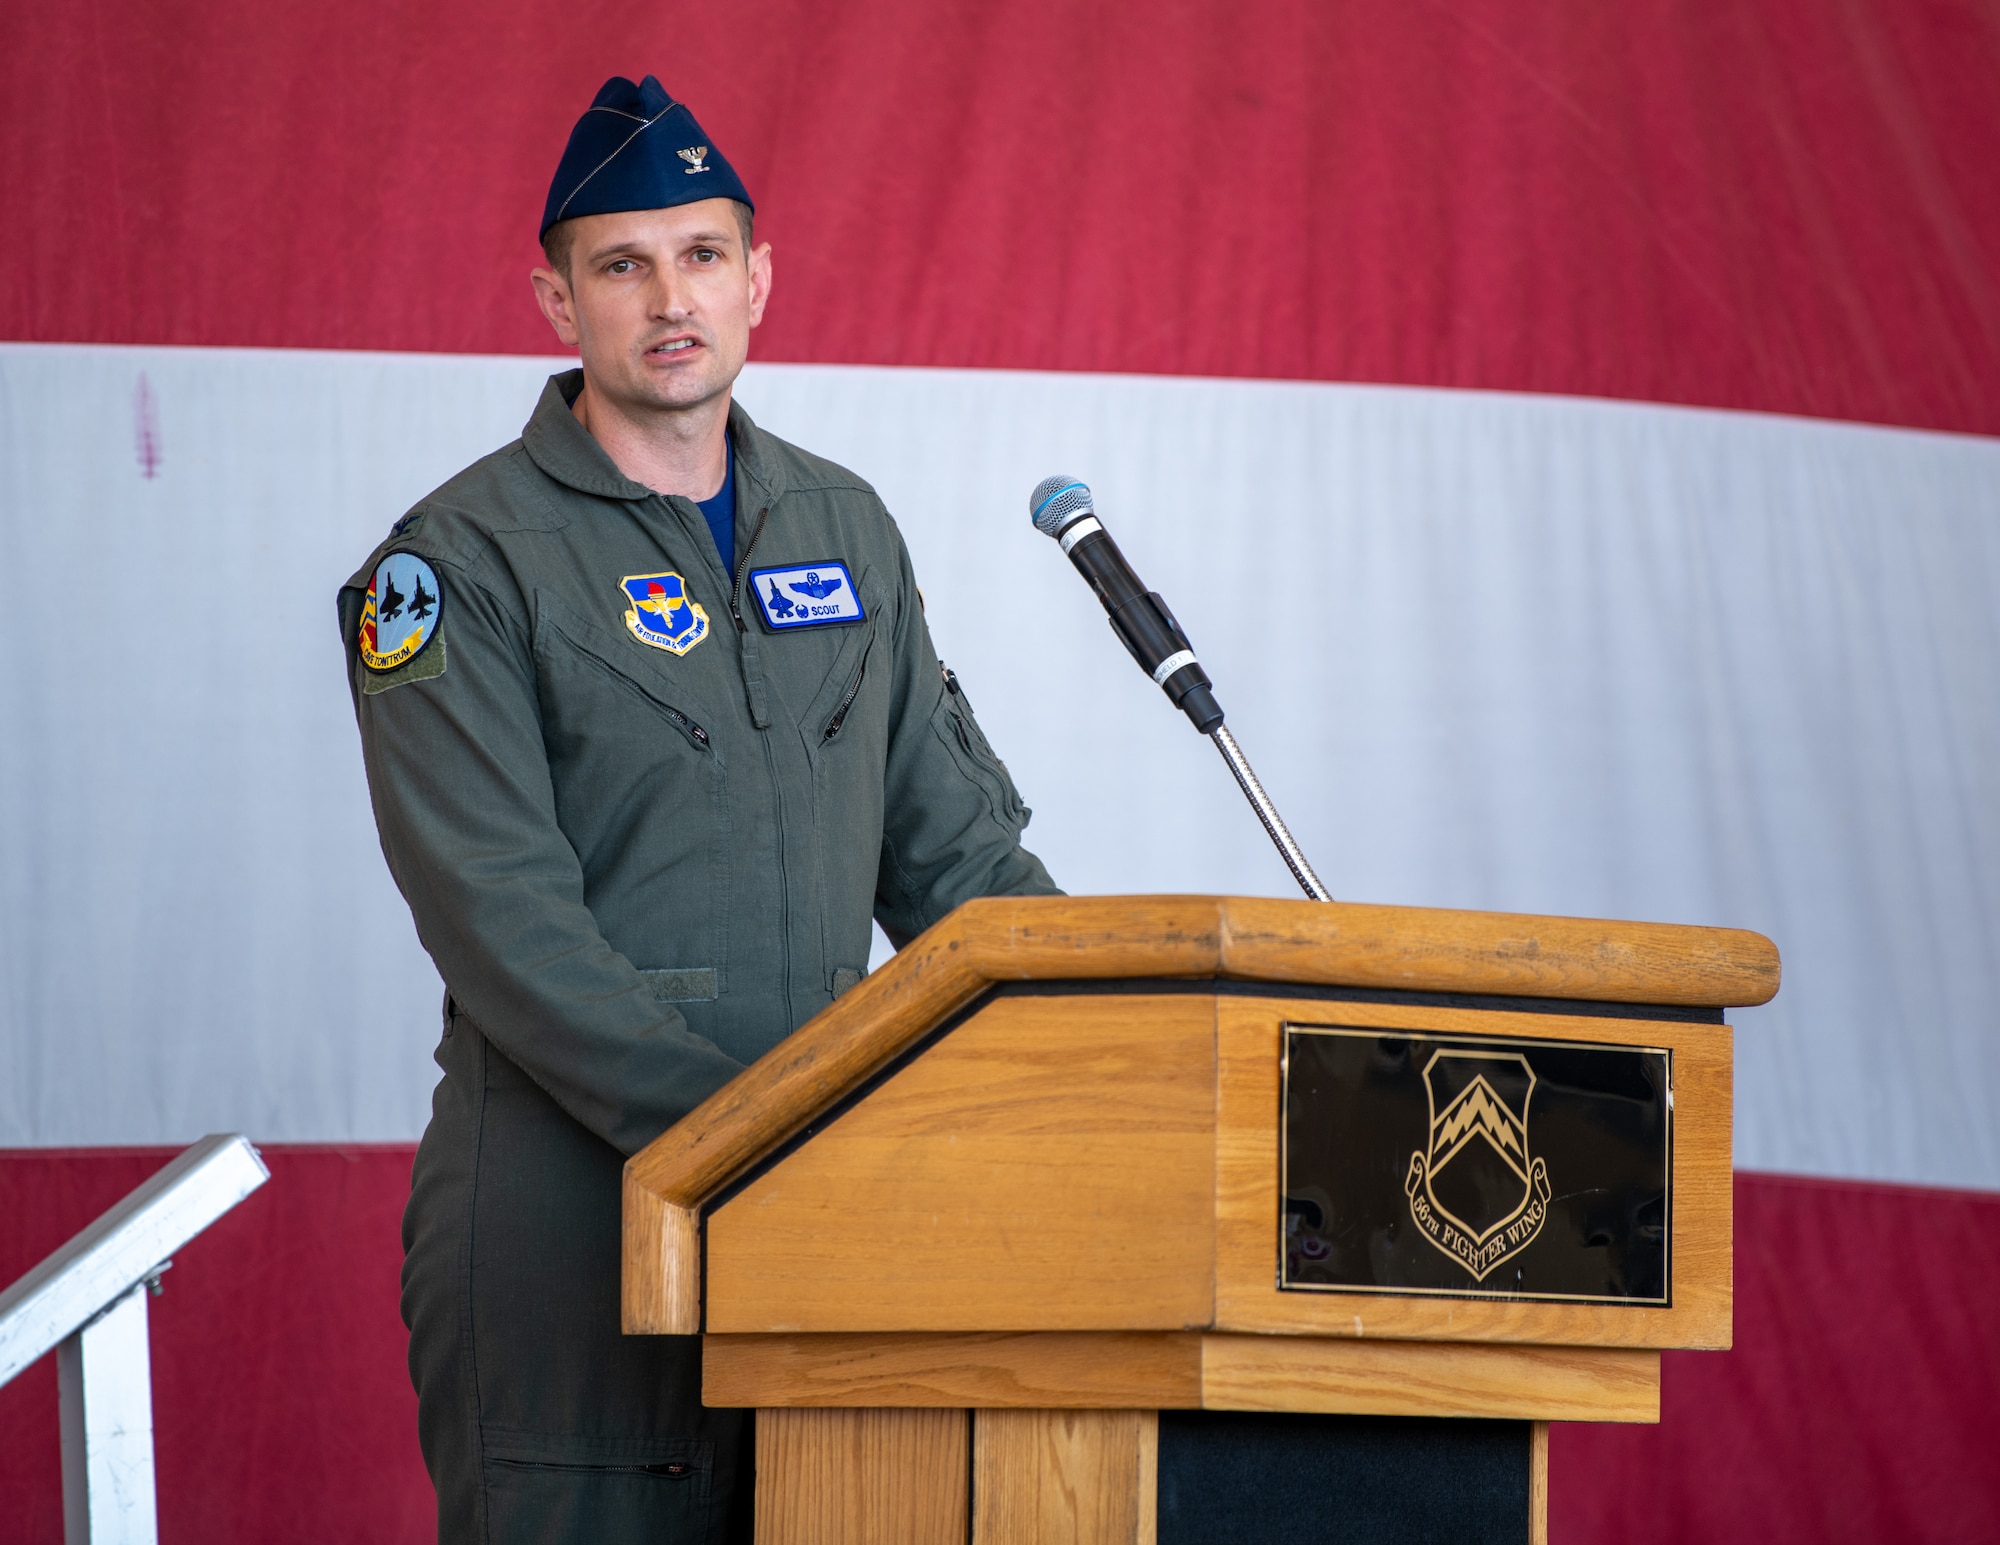 U.S. Air Force Col. Matthew Johnston, 56th Operations Group commander, provides remarks after assuming command during the 56th OG change of command ceremony June. 3, 2022, at Luke Air Force Base, Arizona.